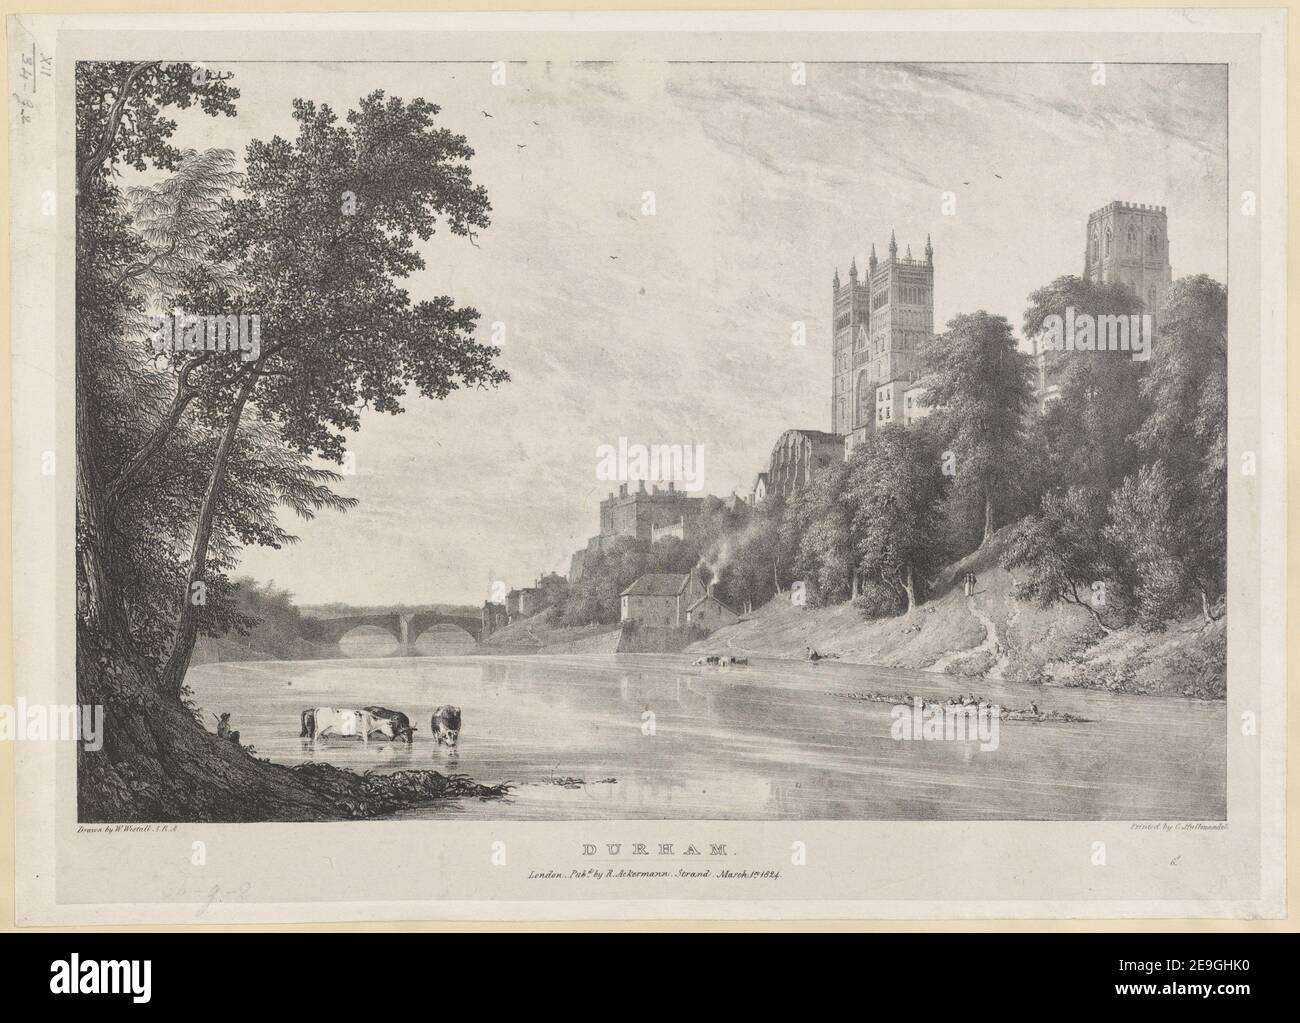 Durham.  Author  Westall, William 12.34.g.2. Place of publication: London Publisher: Pub.d by R. Ackermann. Strand. March 1.st., Date of publication: 1824.  Item type: 1 print Medium: lithograph Dimensions: sheet 30.0 x 41.8 cm  Former owner: George III, King of Great Britain, 1738-1820 Stock Photo